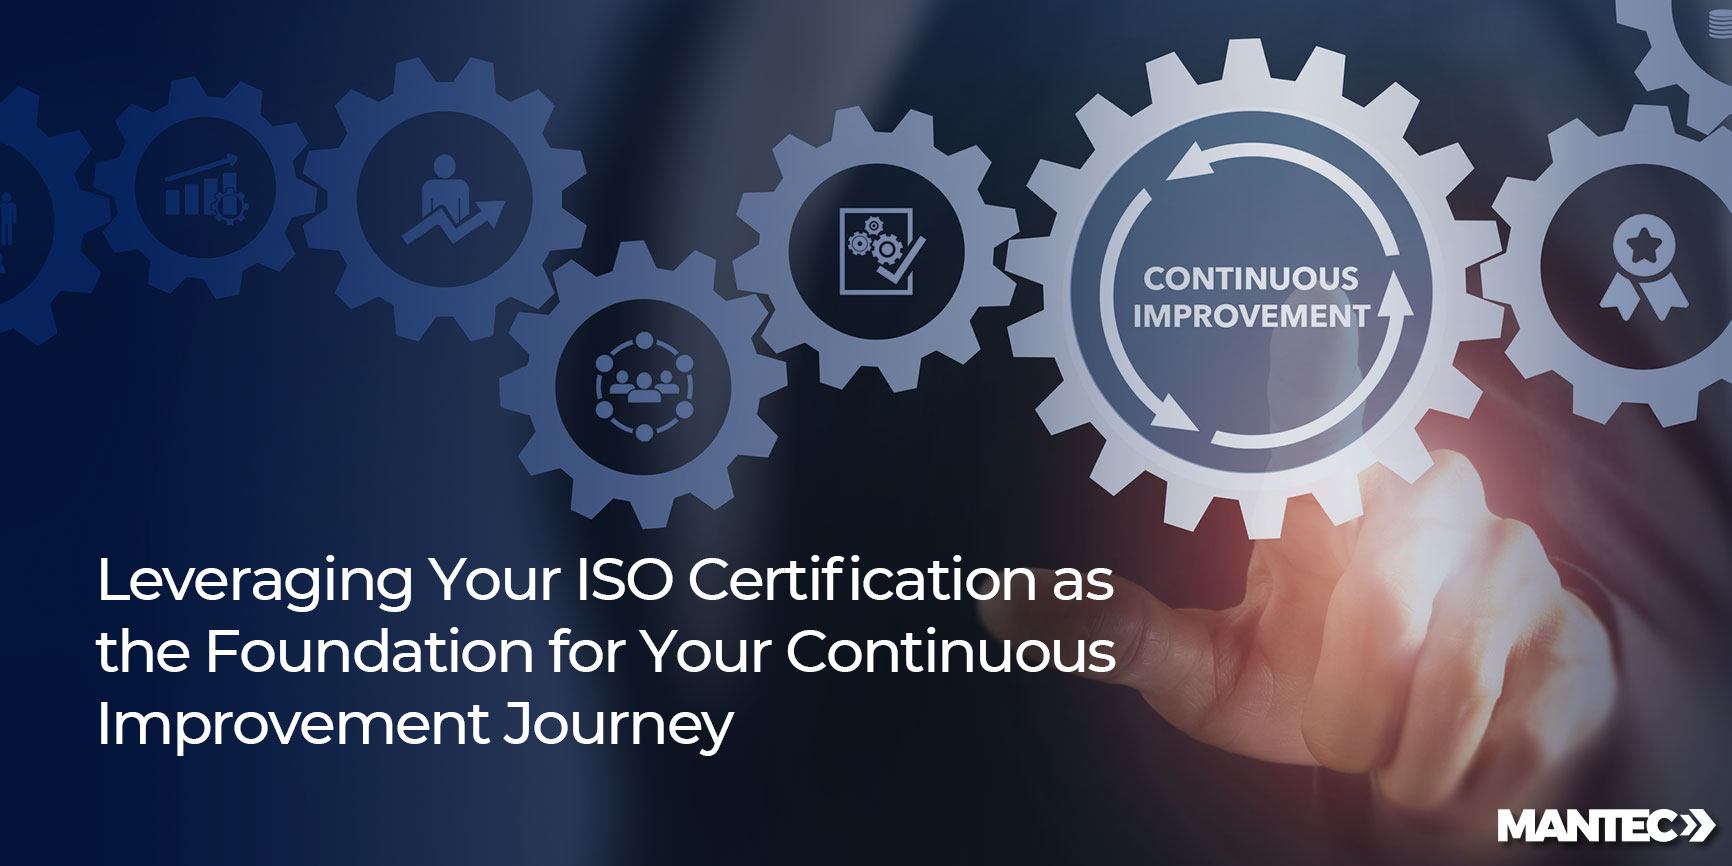 Leveraging your ISO certification as the foundation for your continuous improvement journey